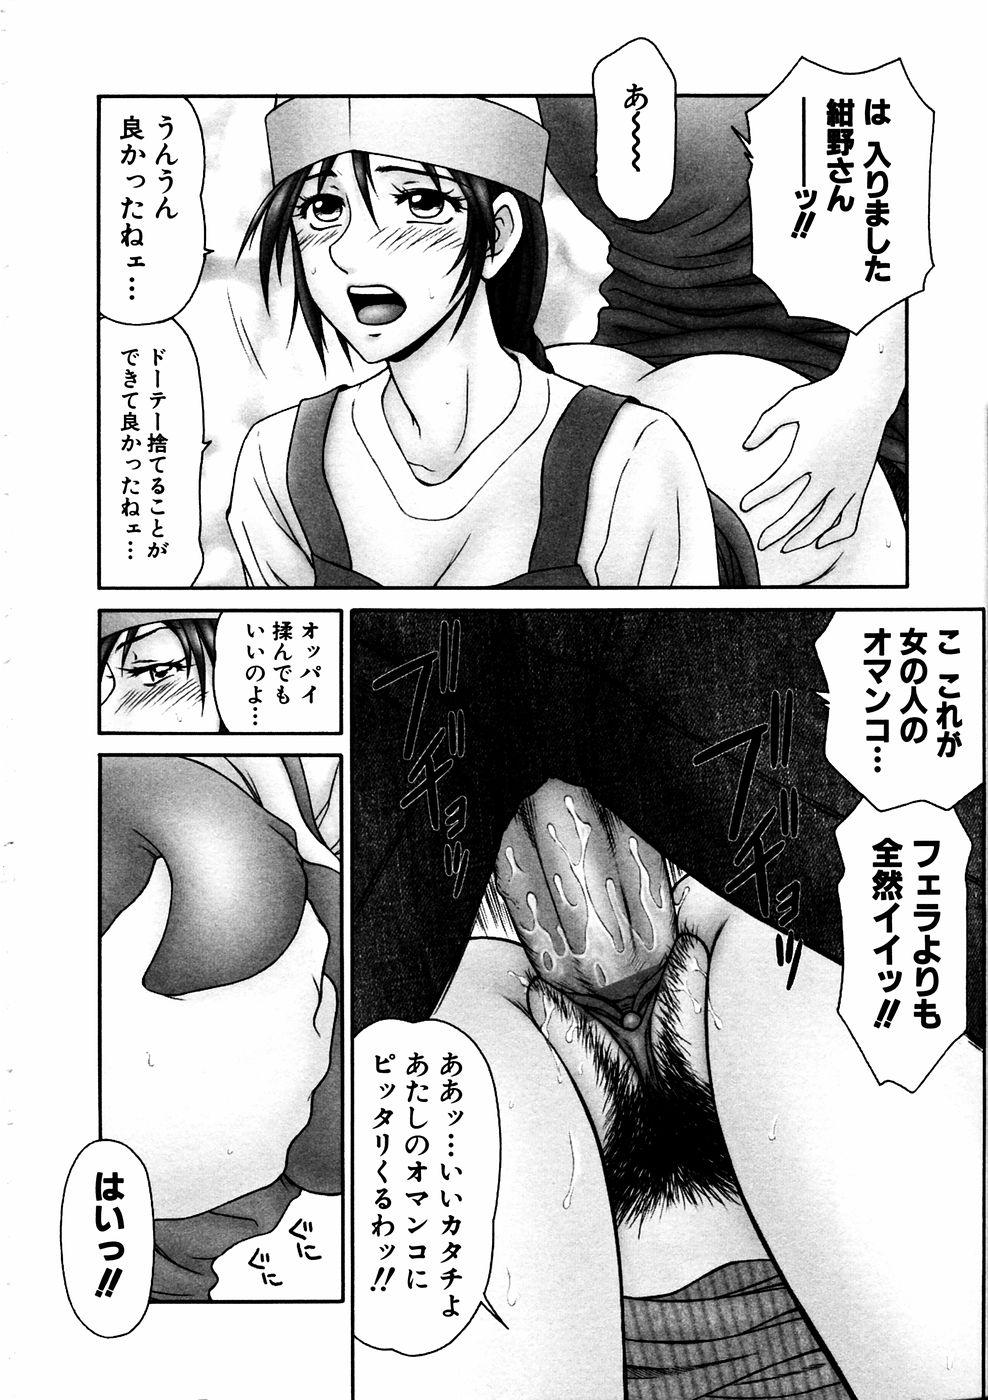 Hot Blow Jobs Comic Hime Dorobou 2006-11 Camgirls - Page 9